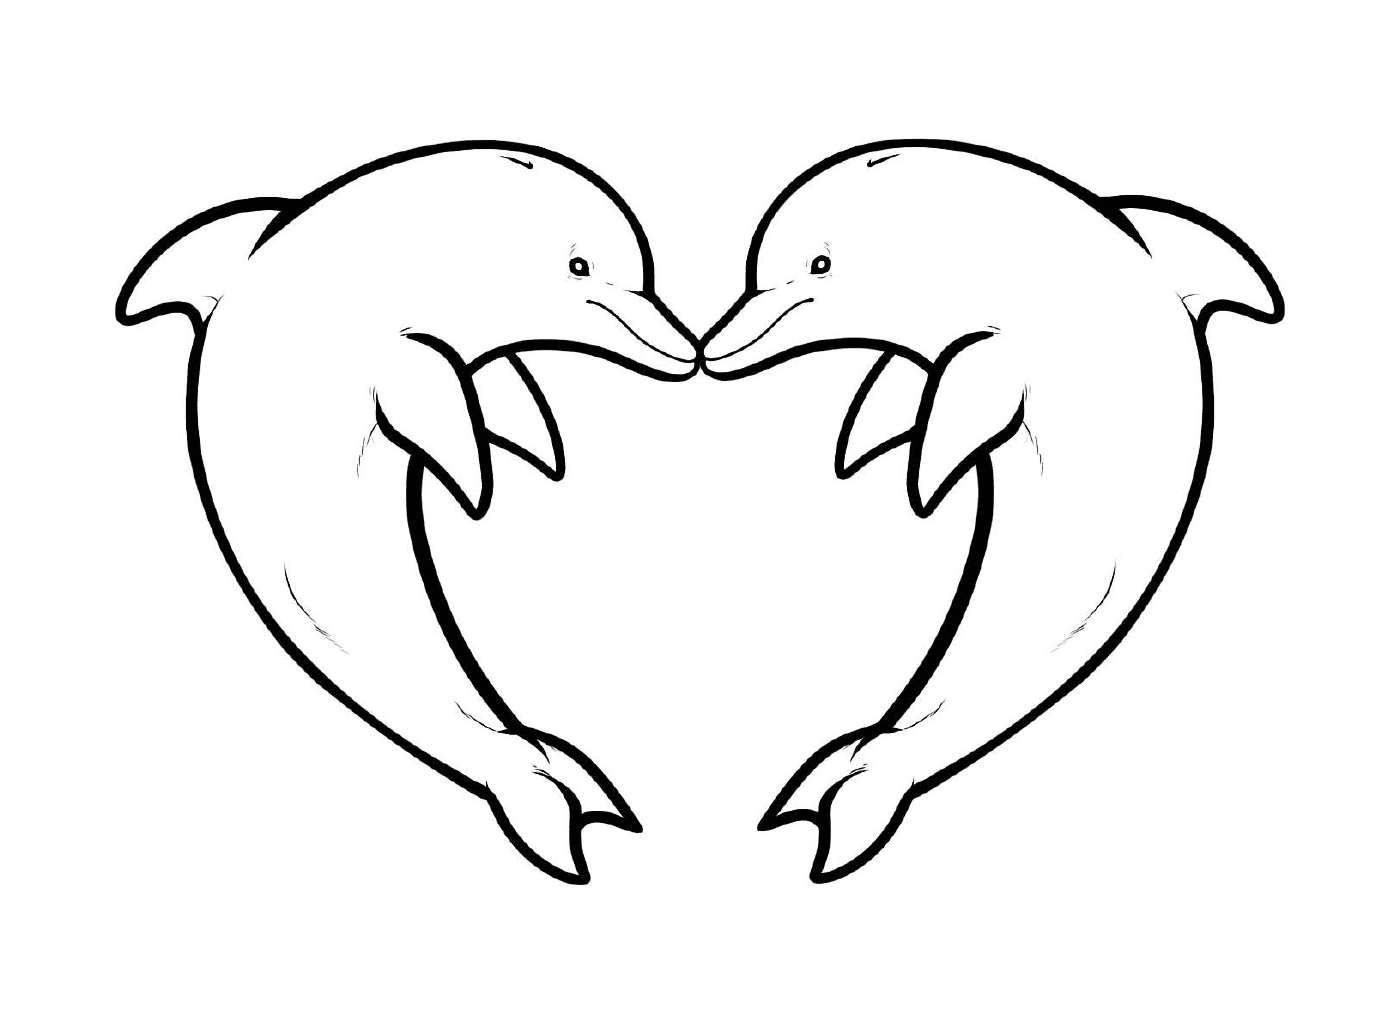  two dolphins forming the shape of a heart 